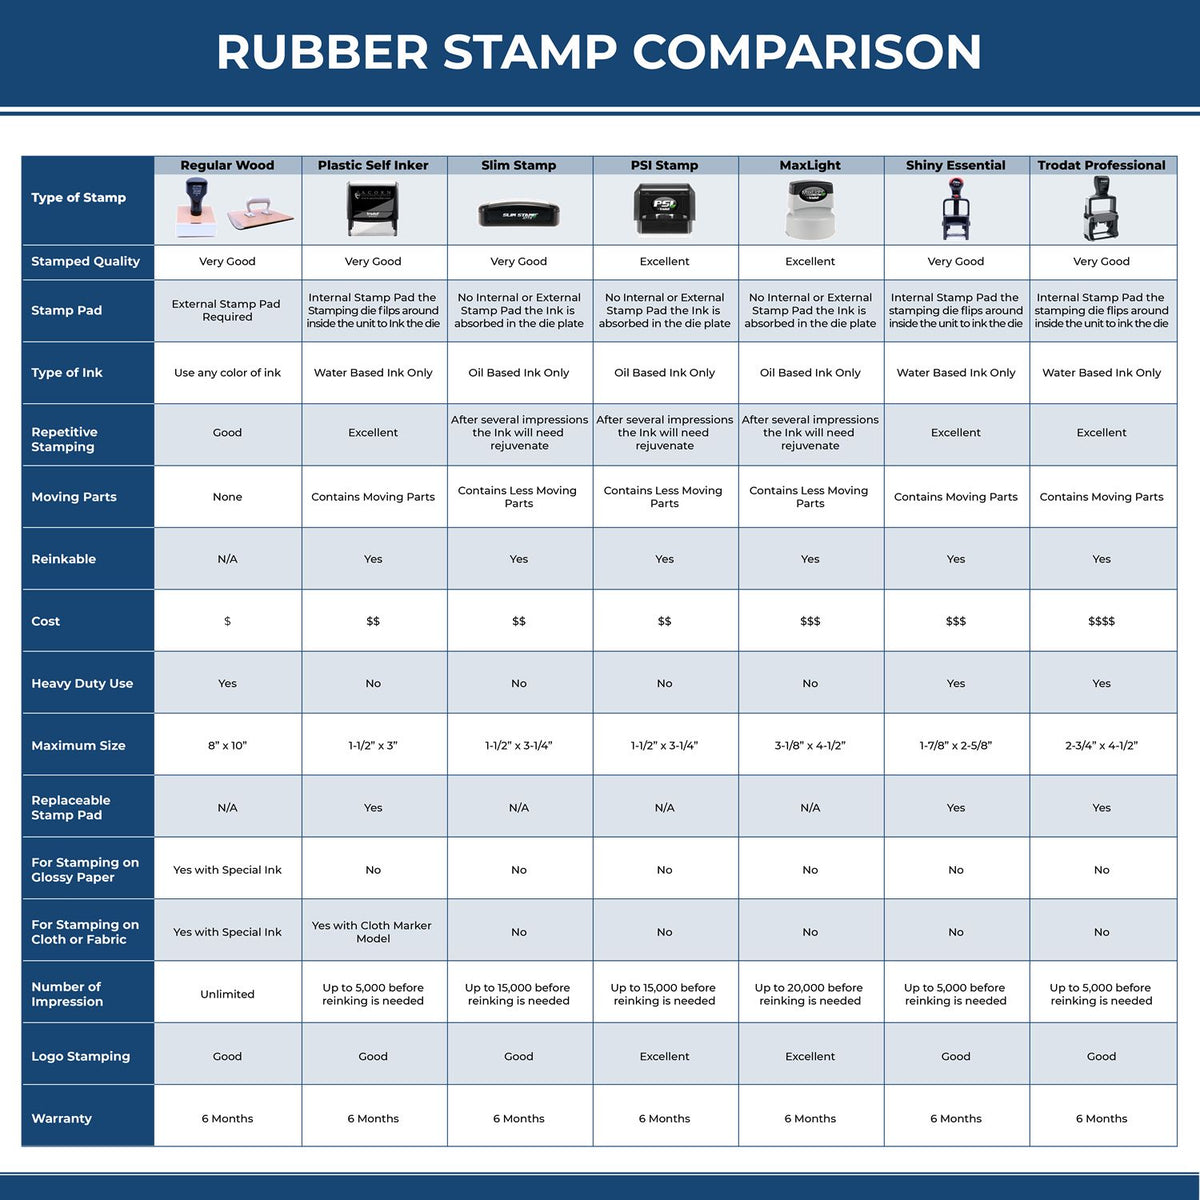 A comparison chart for the different types of mount models available for the PSI Michigan Notary Stamp.